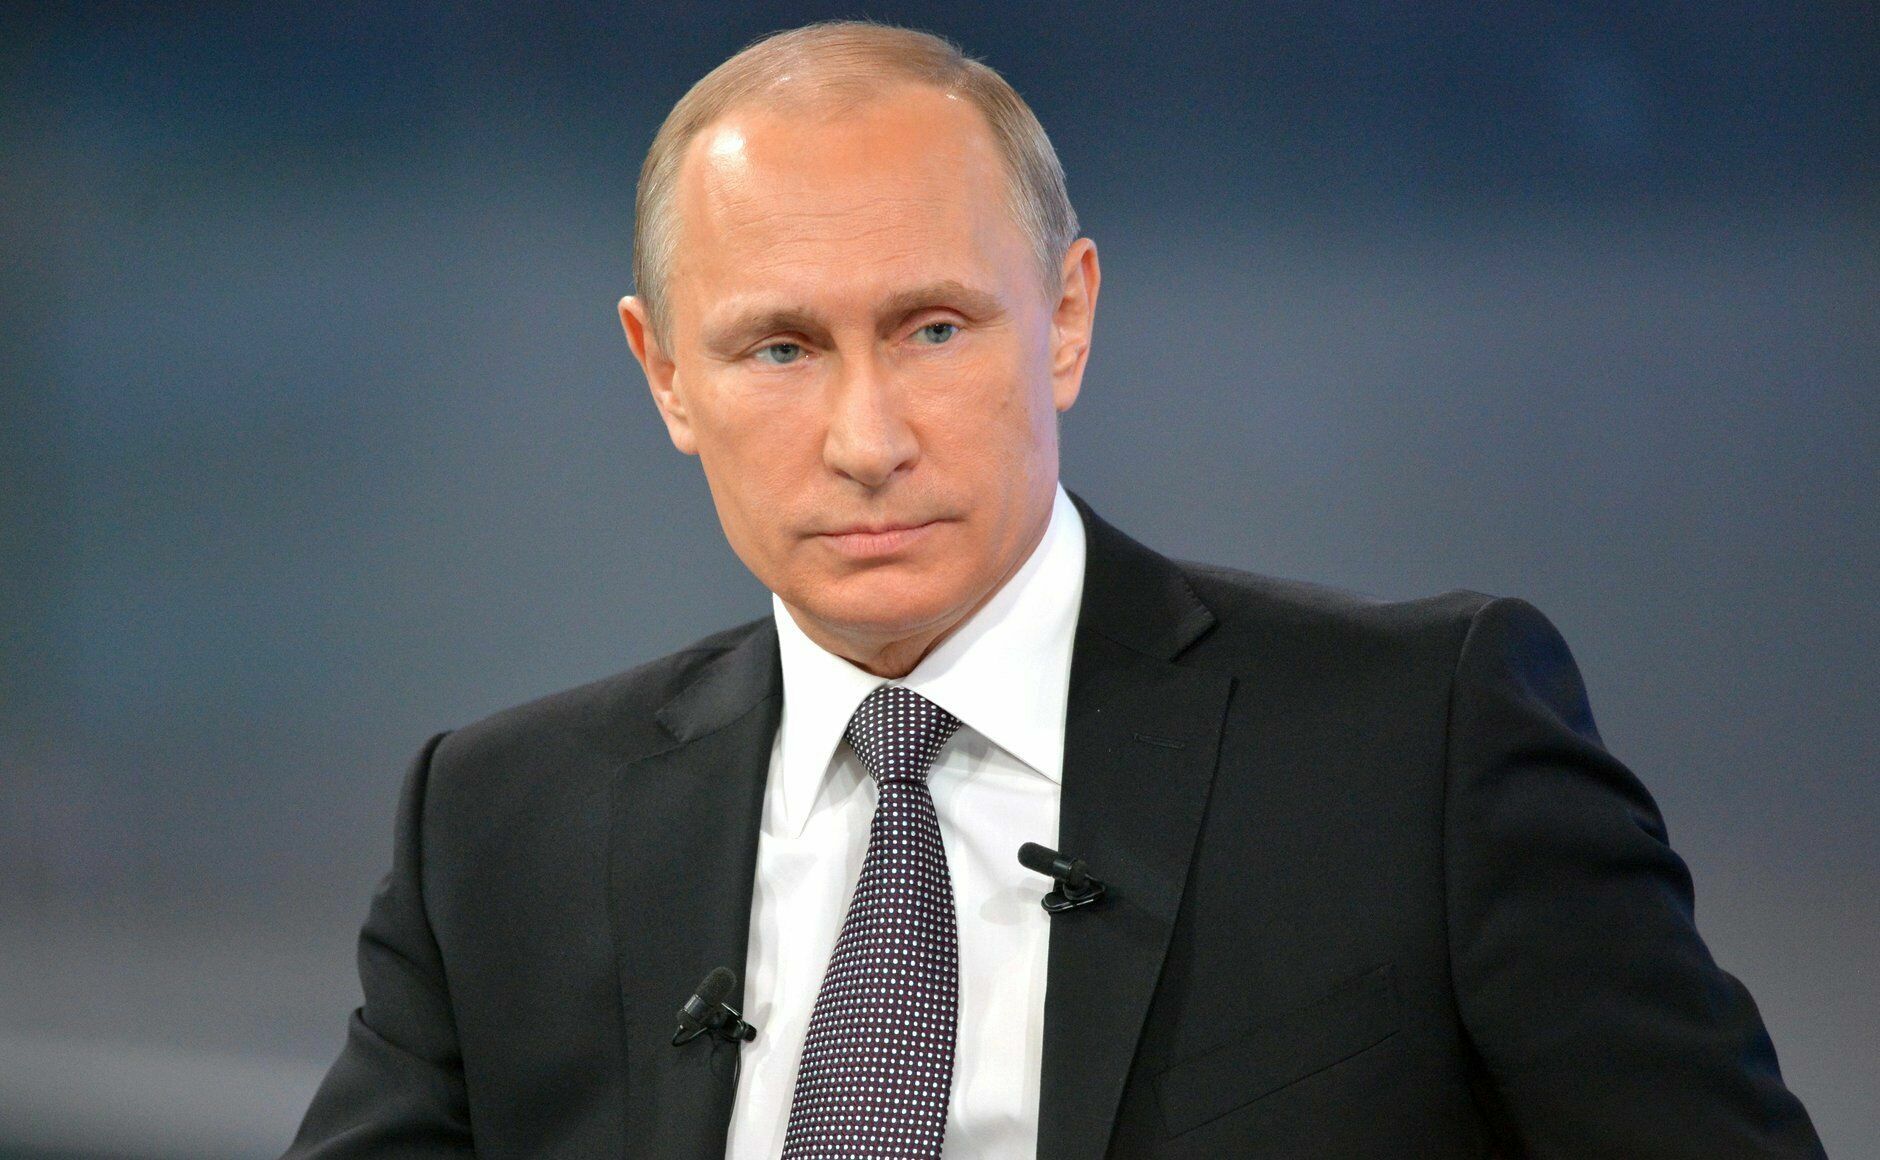 Putin did not rule out that he would run for president again